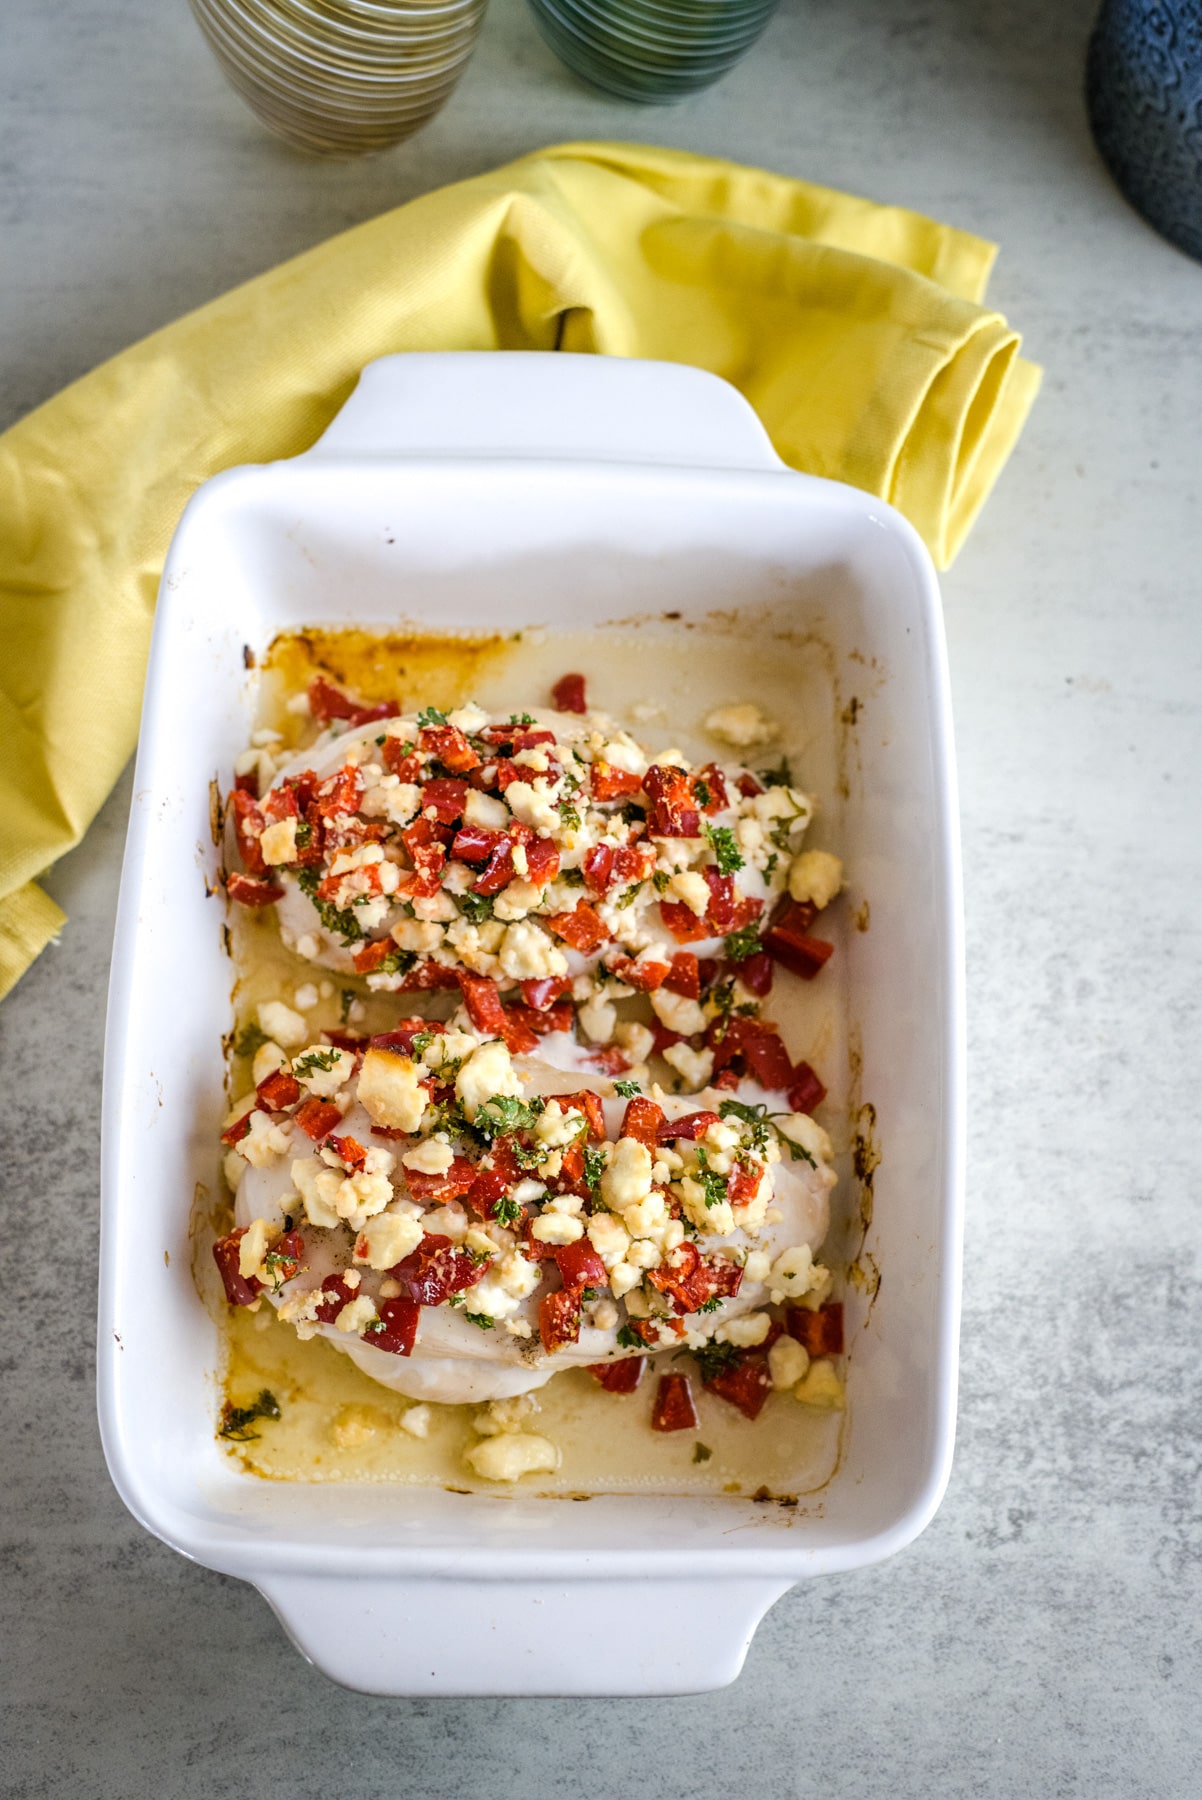 baked chicken with feta and red pepper on top.